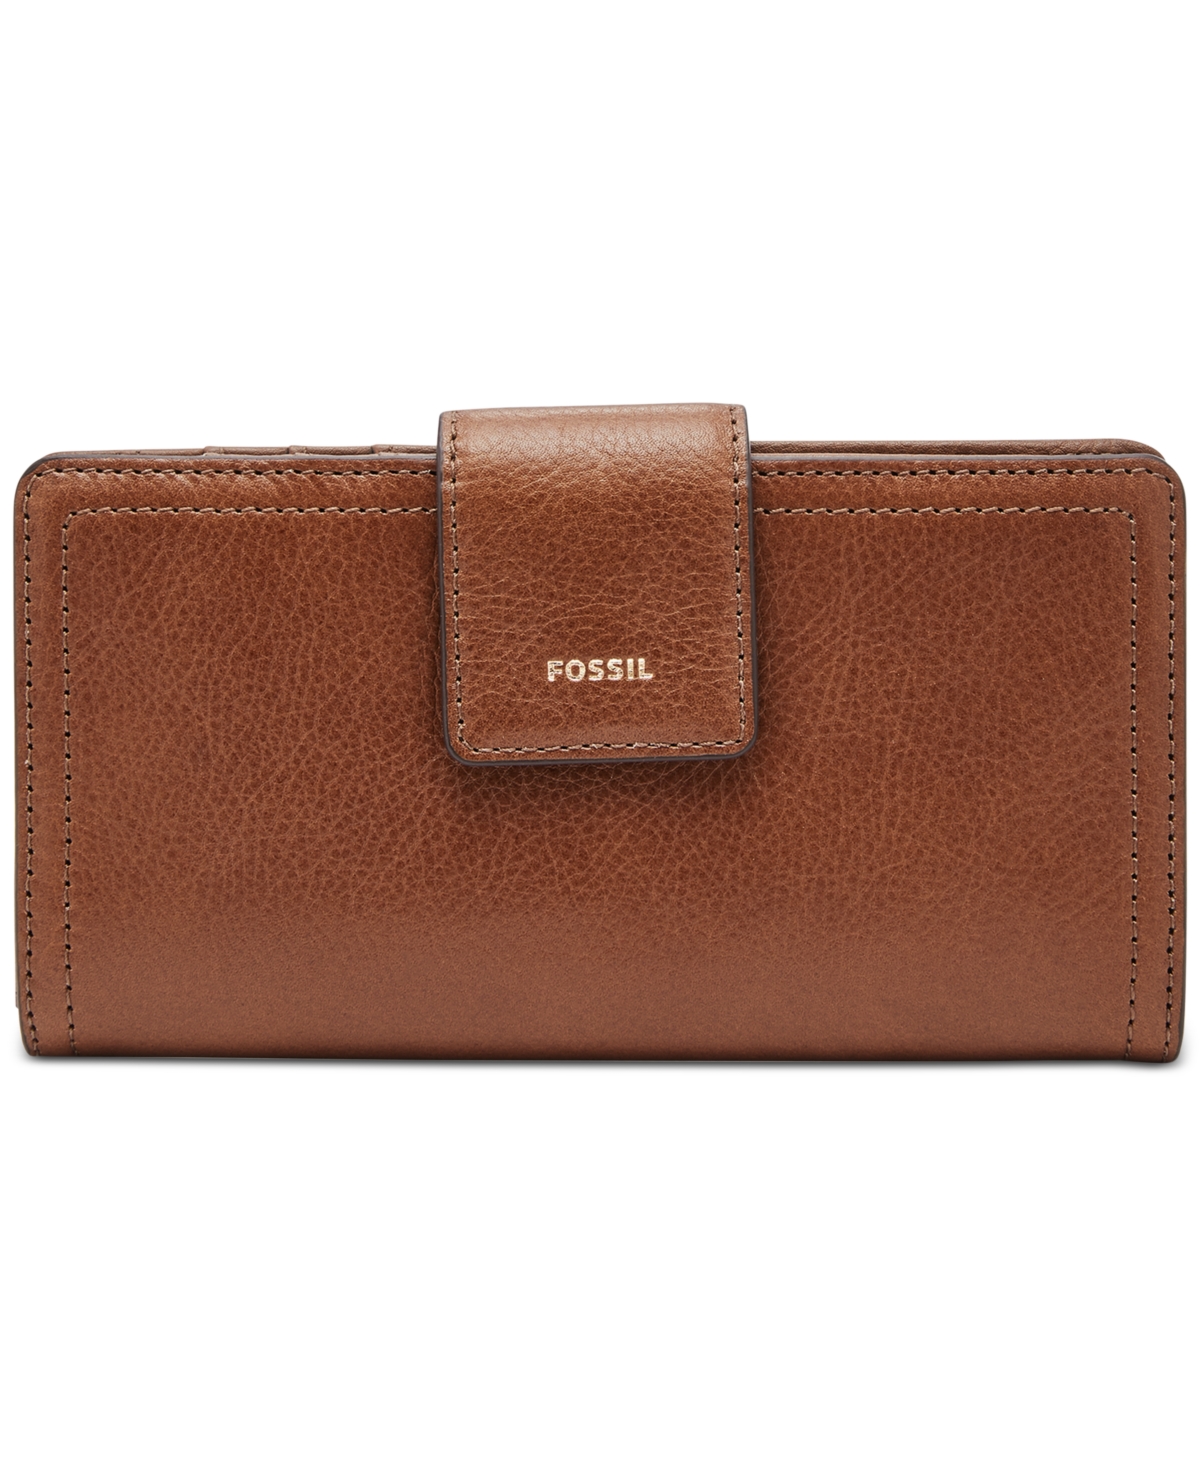 Fossil Logan Leather Rfid Tab Clutch Wallet In Brown,gold